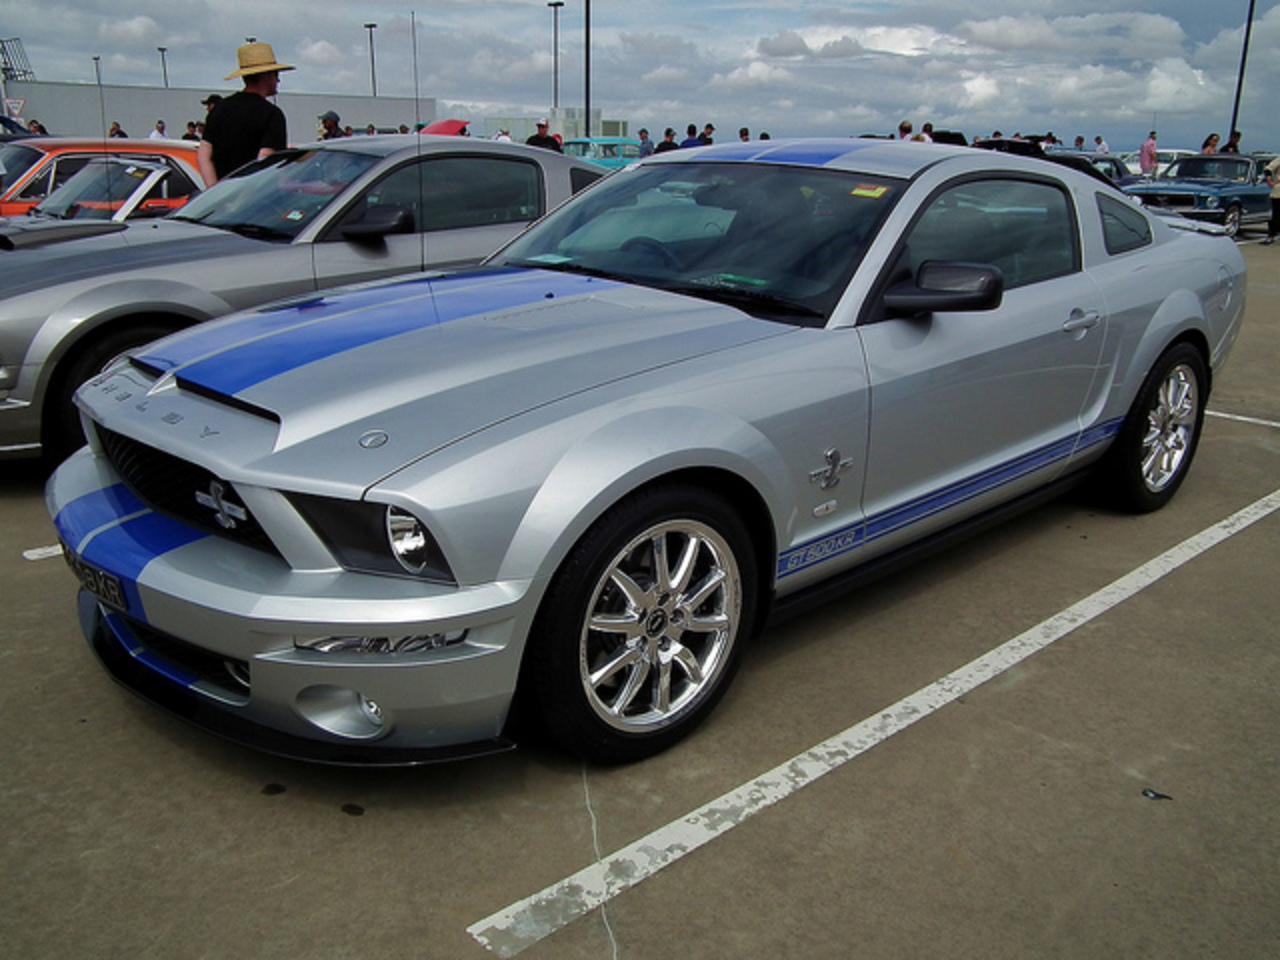 2008 Ford Mustang Shelby GT500KR 40th Anniversary coupe | Flickr ...